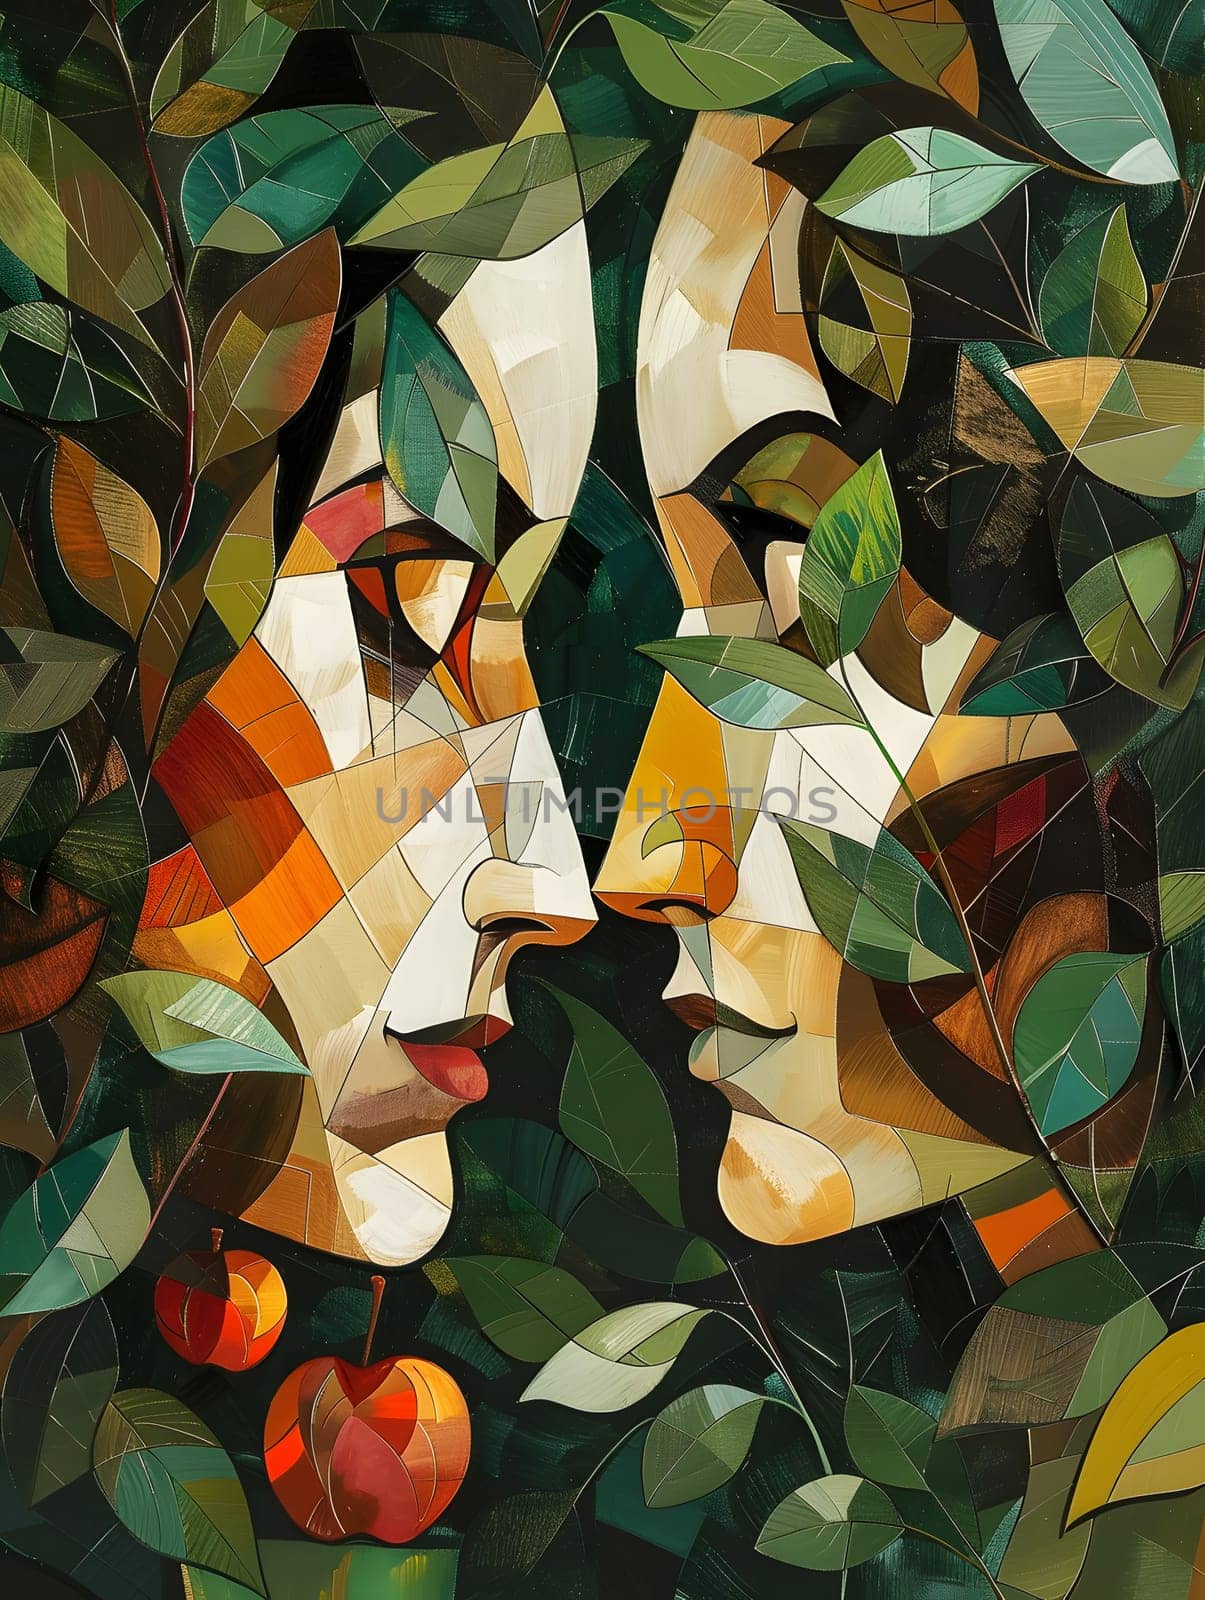 a painting of two people looking at each other surrounded by leaves and apples by Nadtochiy